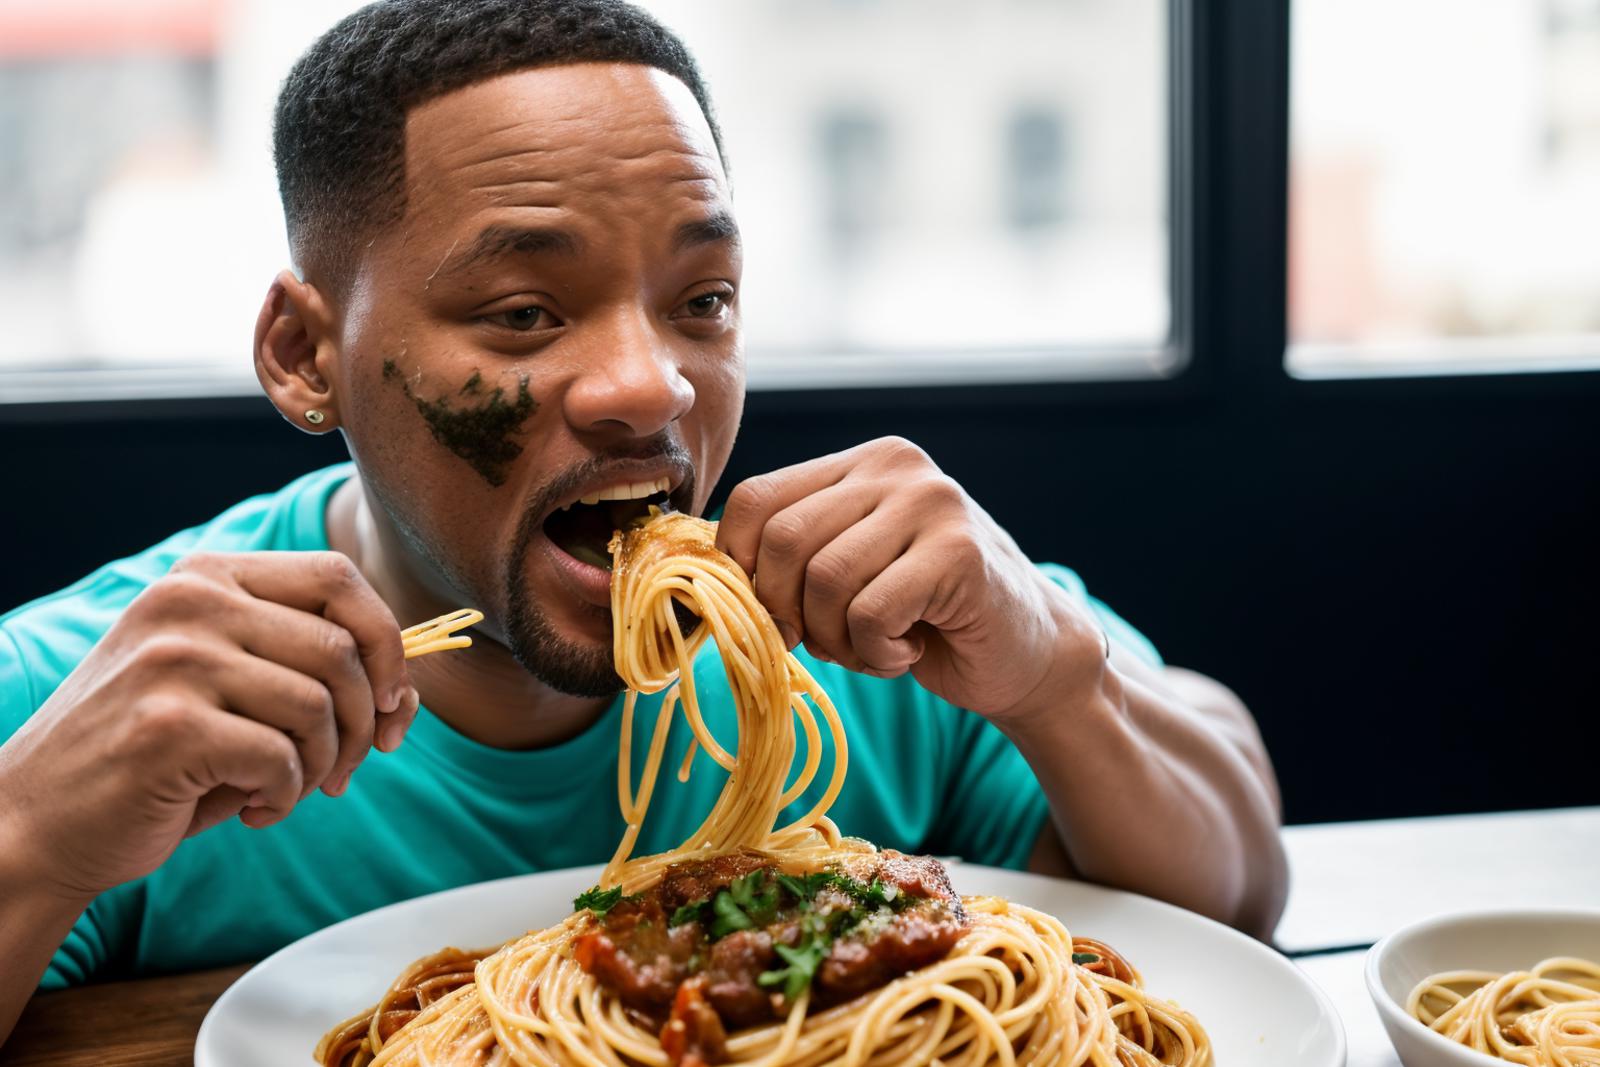 A man eating spaghetti with sauce and green garnish.